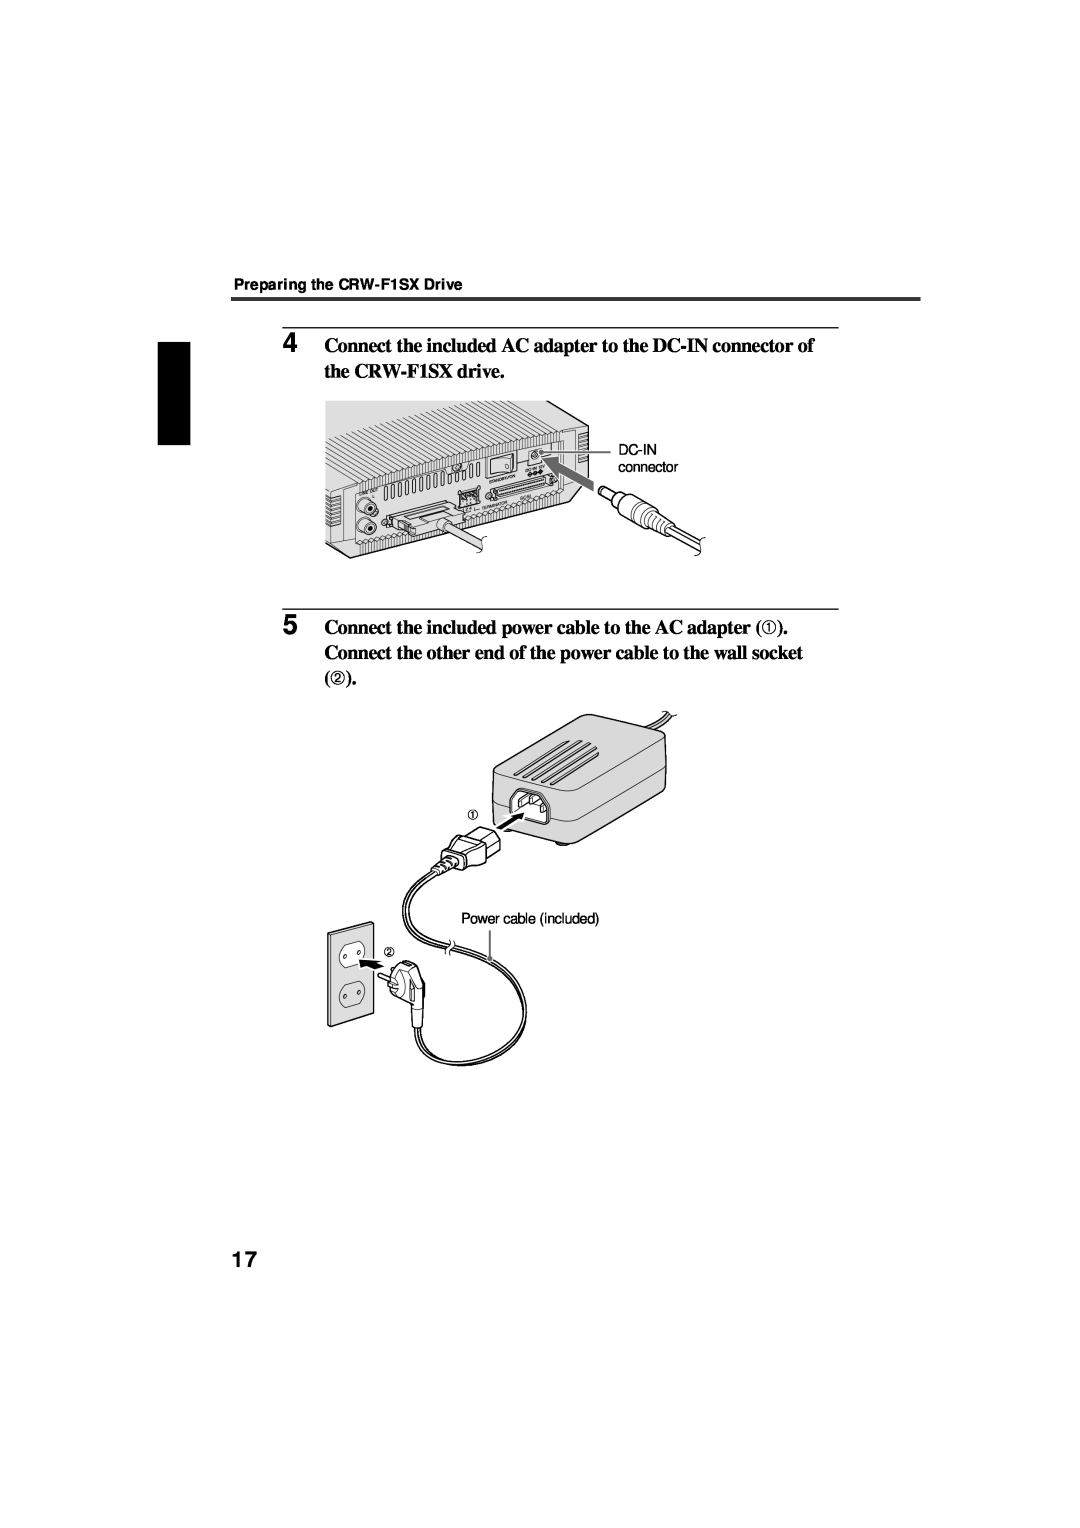 Yamaha manual Connect the included power cable to the AC adapter ➀, Preparing the CRW-F1SX Drive, DC-IN connector 